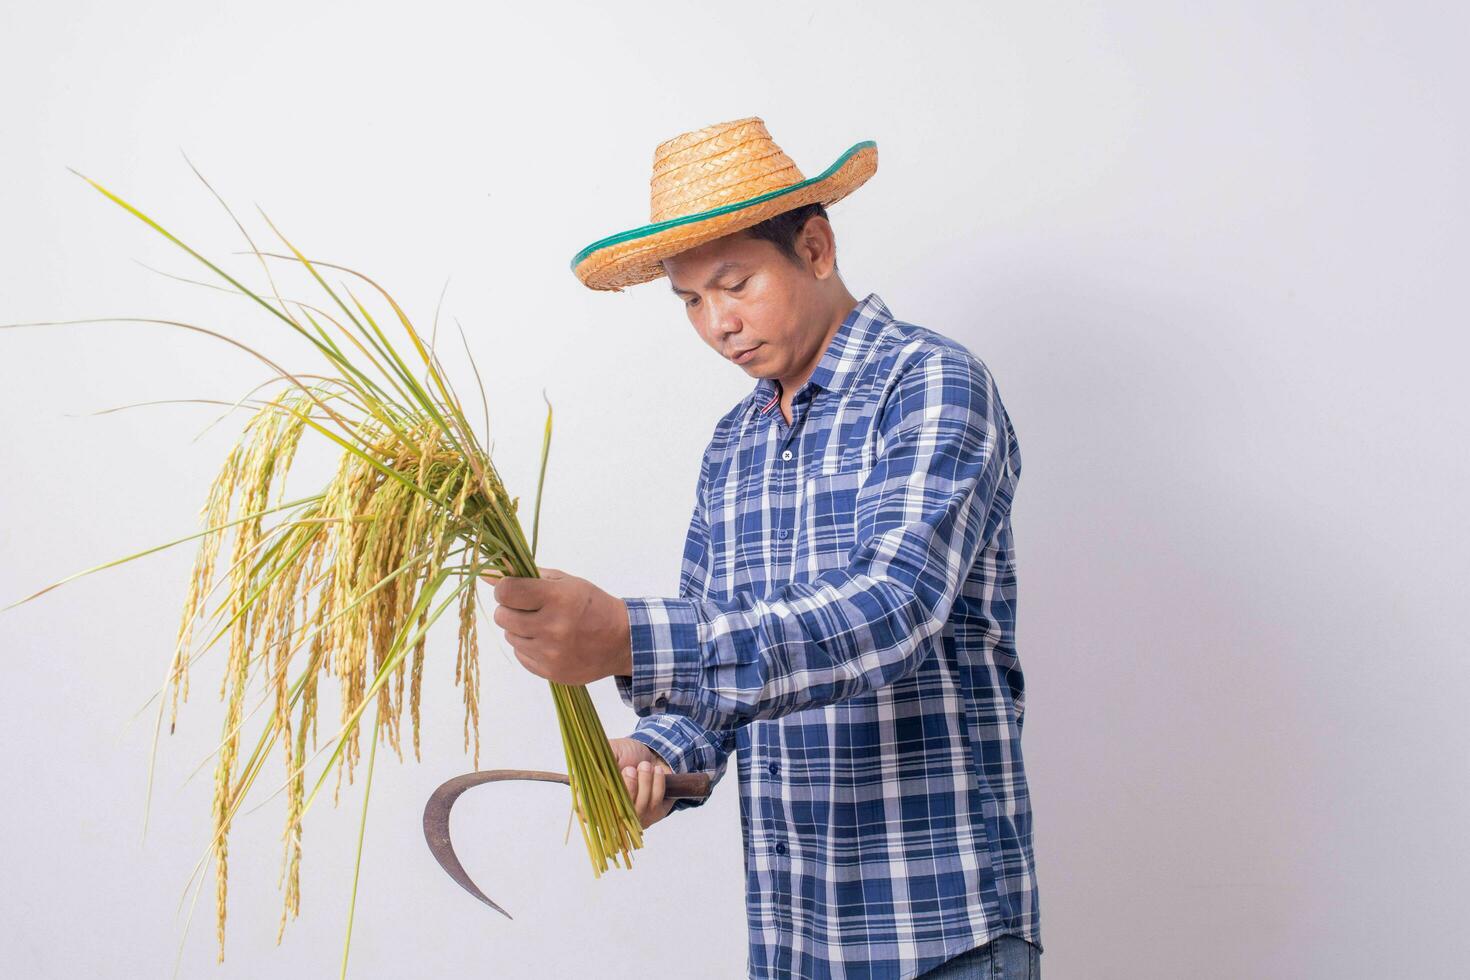 Asian farmer in a striped shirt holding a sickle and harvesting rice grains on a white background. photo